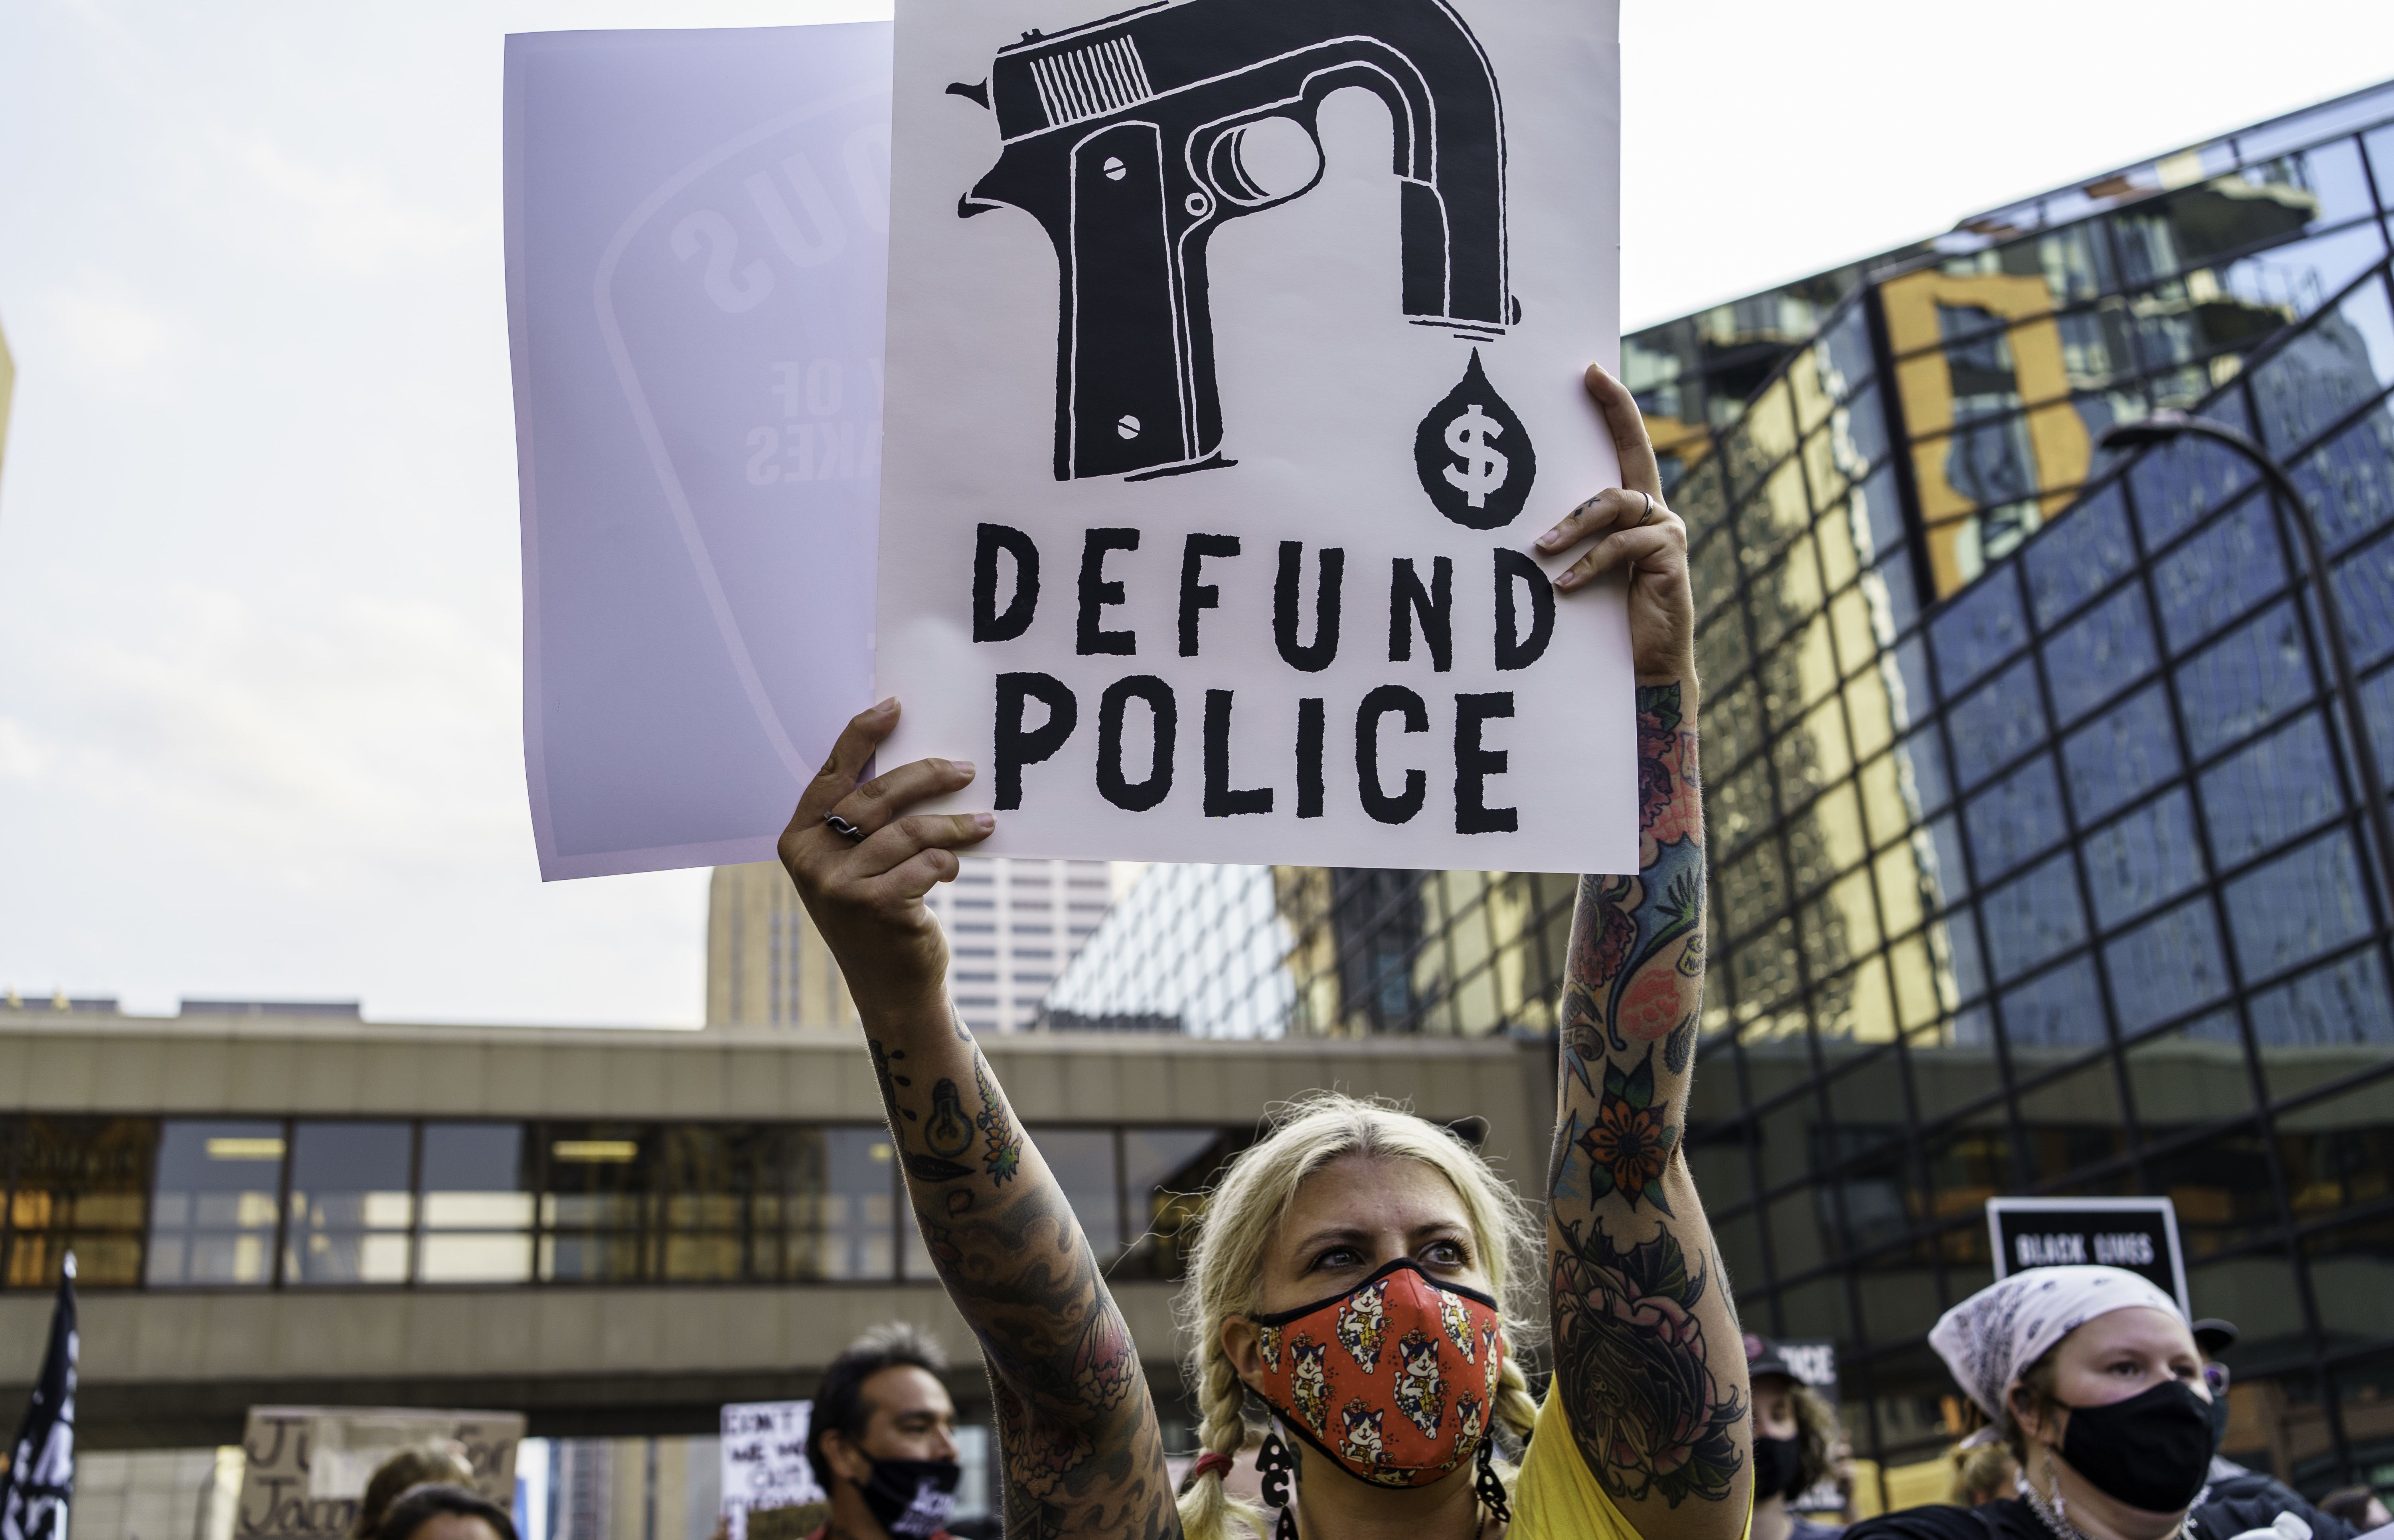 A protester hold a sign reading "Defund the Police" outside Hennepin County Government Plaza during a demonstration against police brutality and racism on Aug. 24, 2020, in Minneapolis. Kerem Yucel/AFP via Getty Images